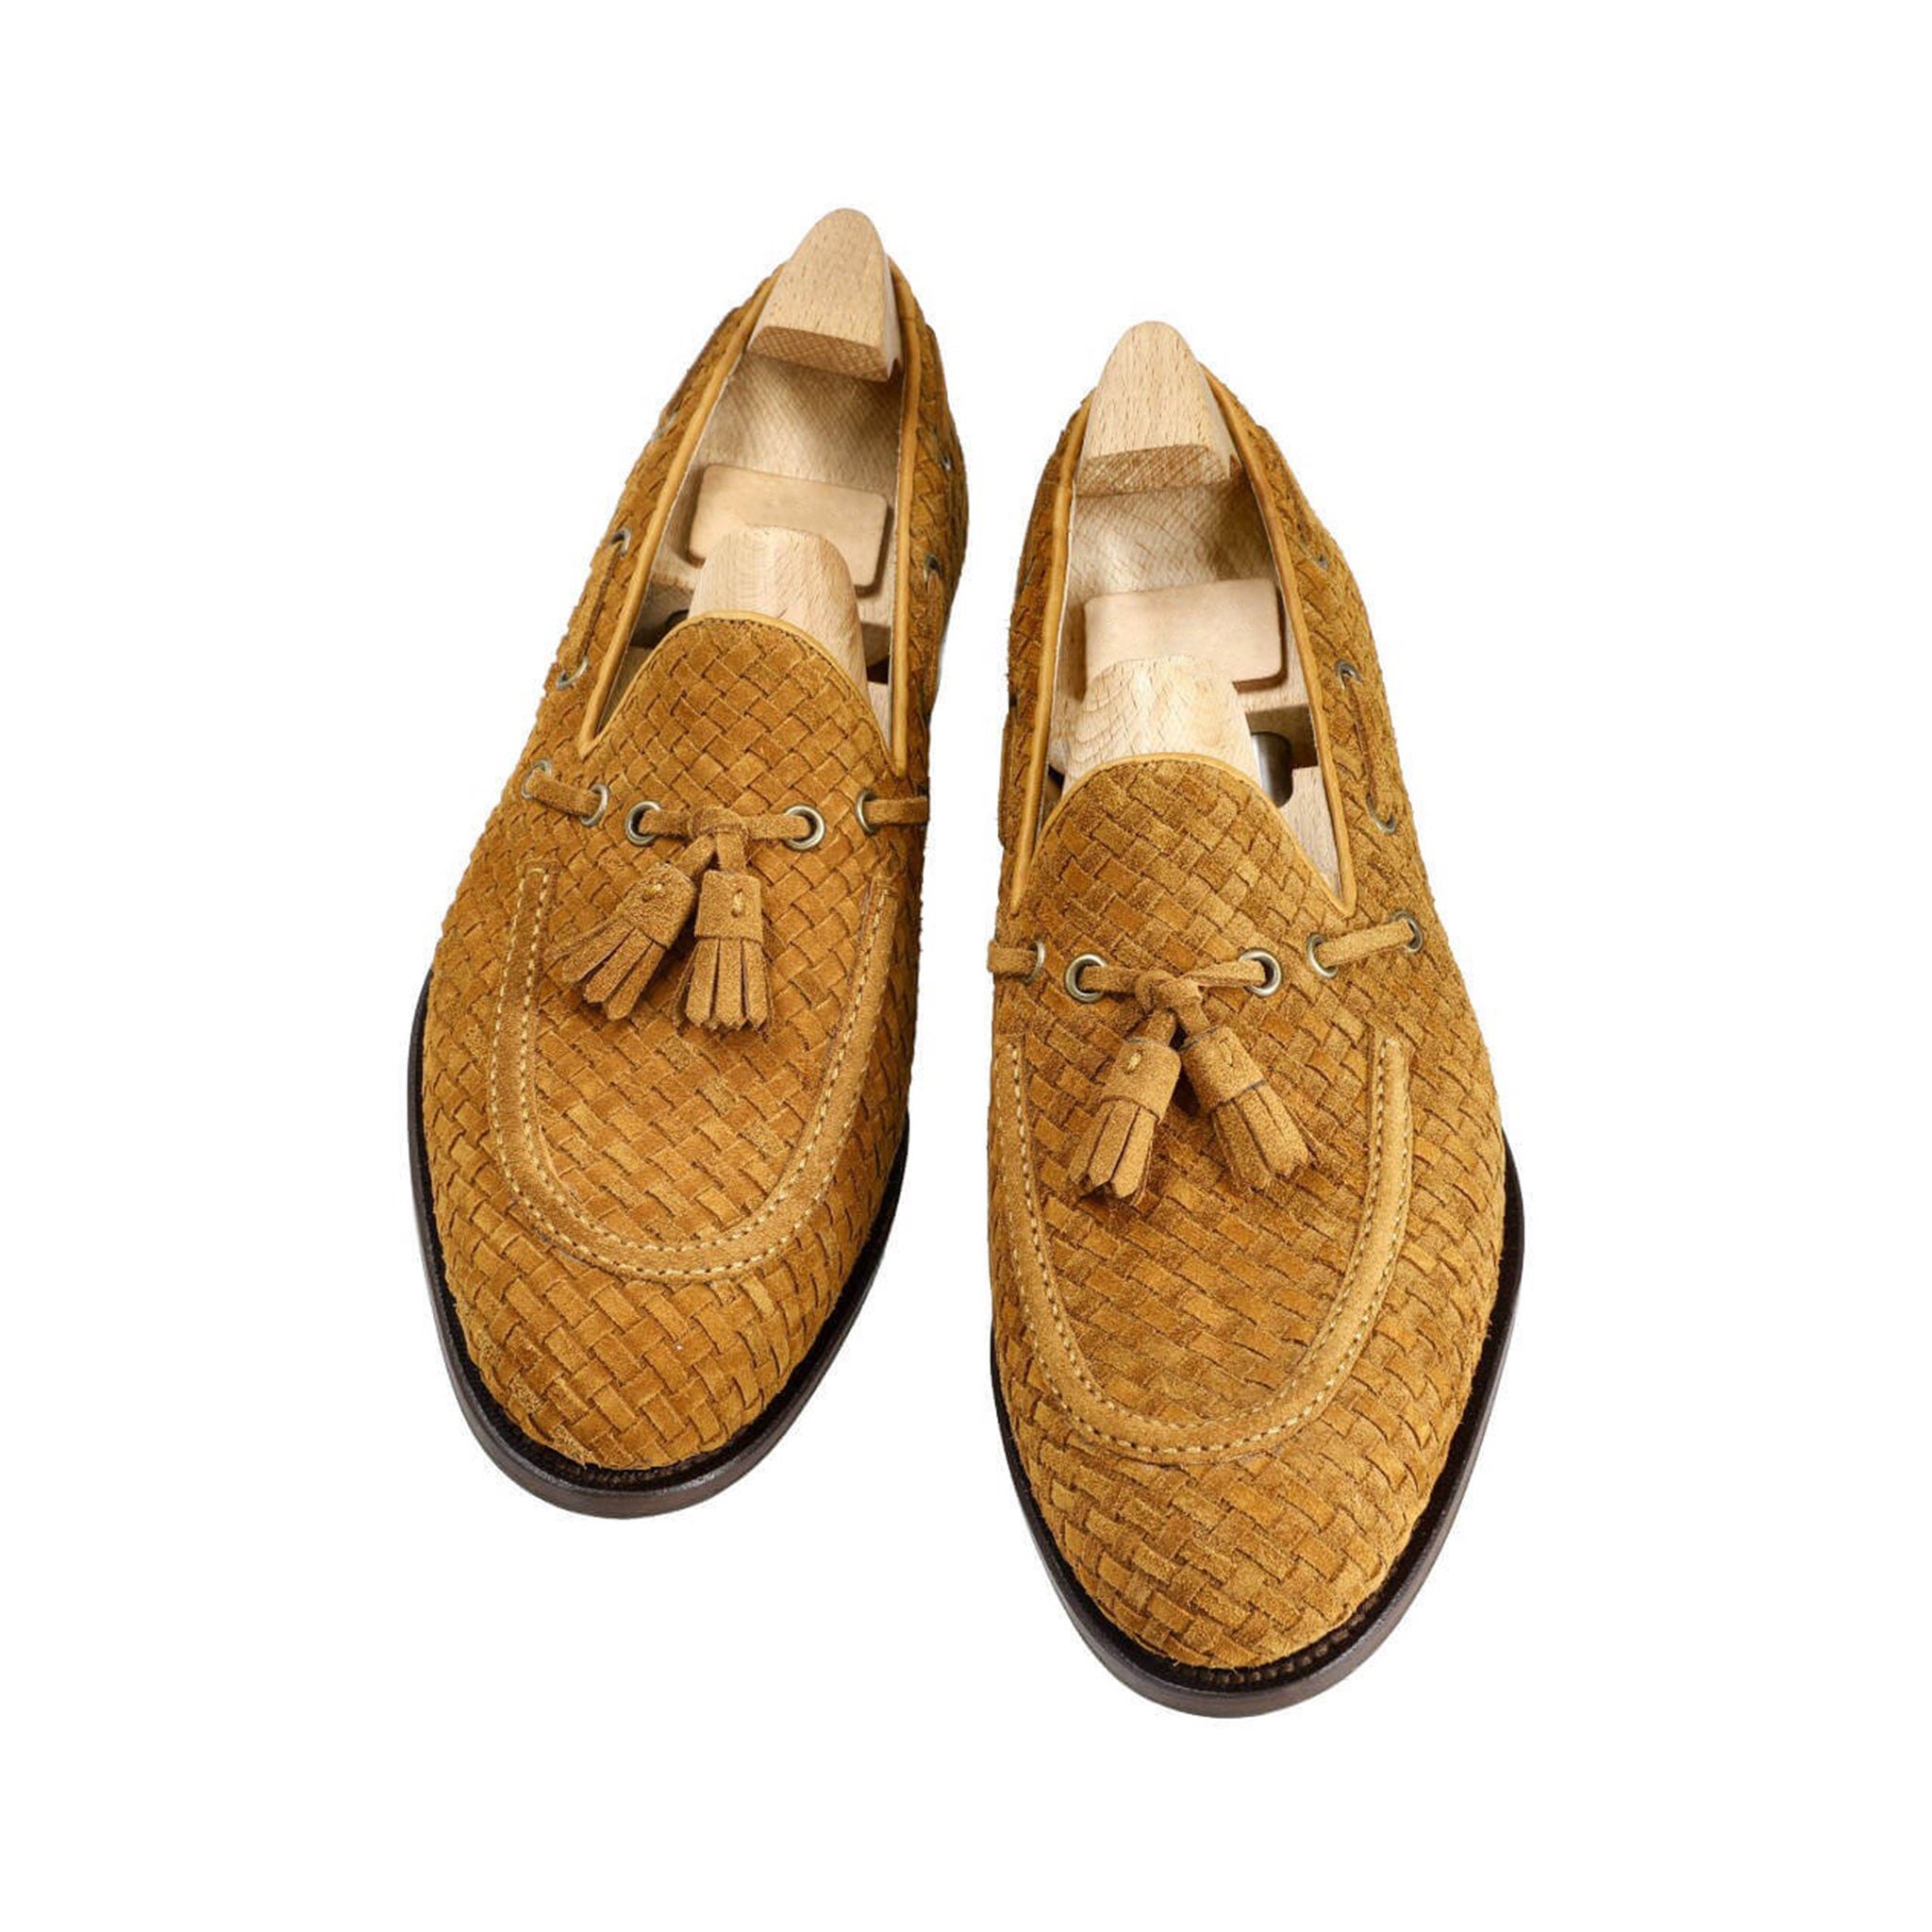 Tanned Braided Suede Tassel Loafers